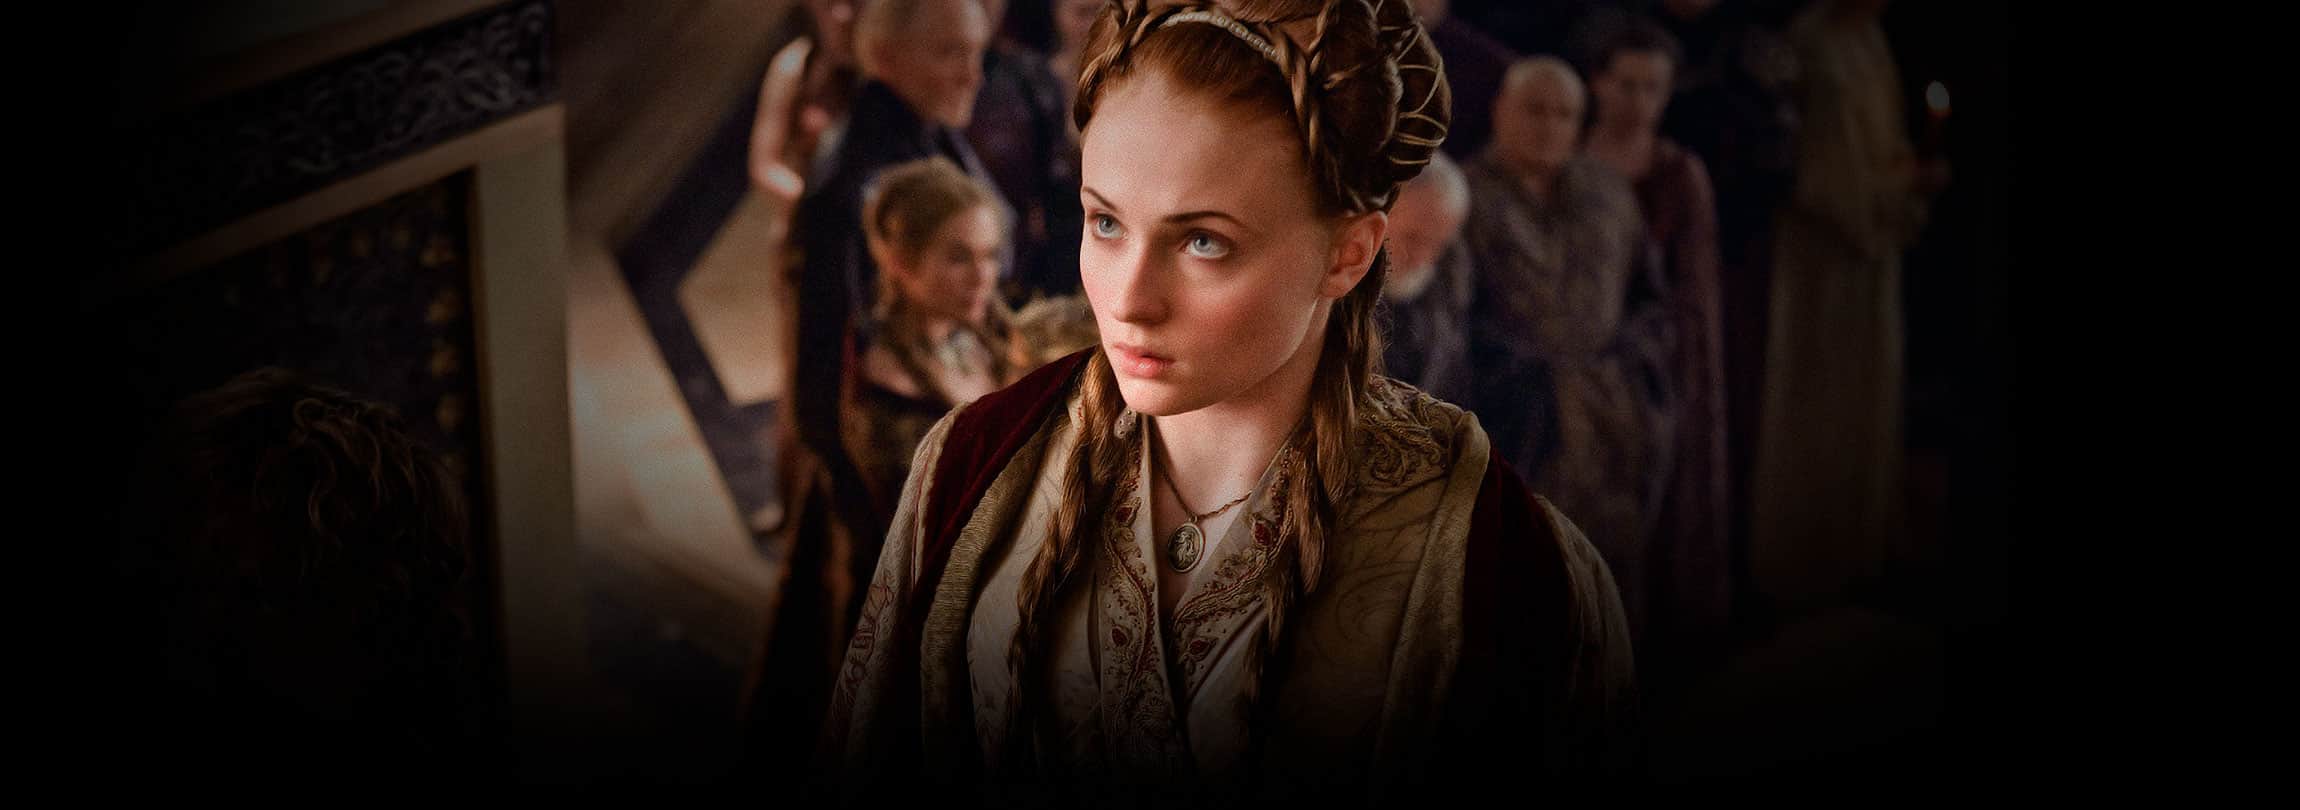 “Game of Thrones” e a mulher medieval